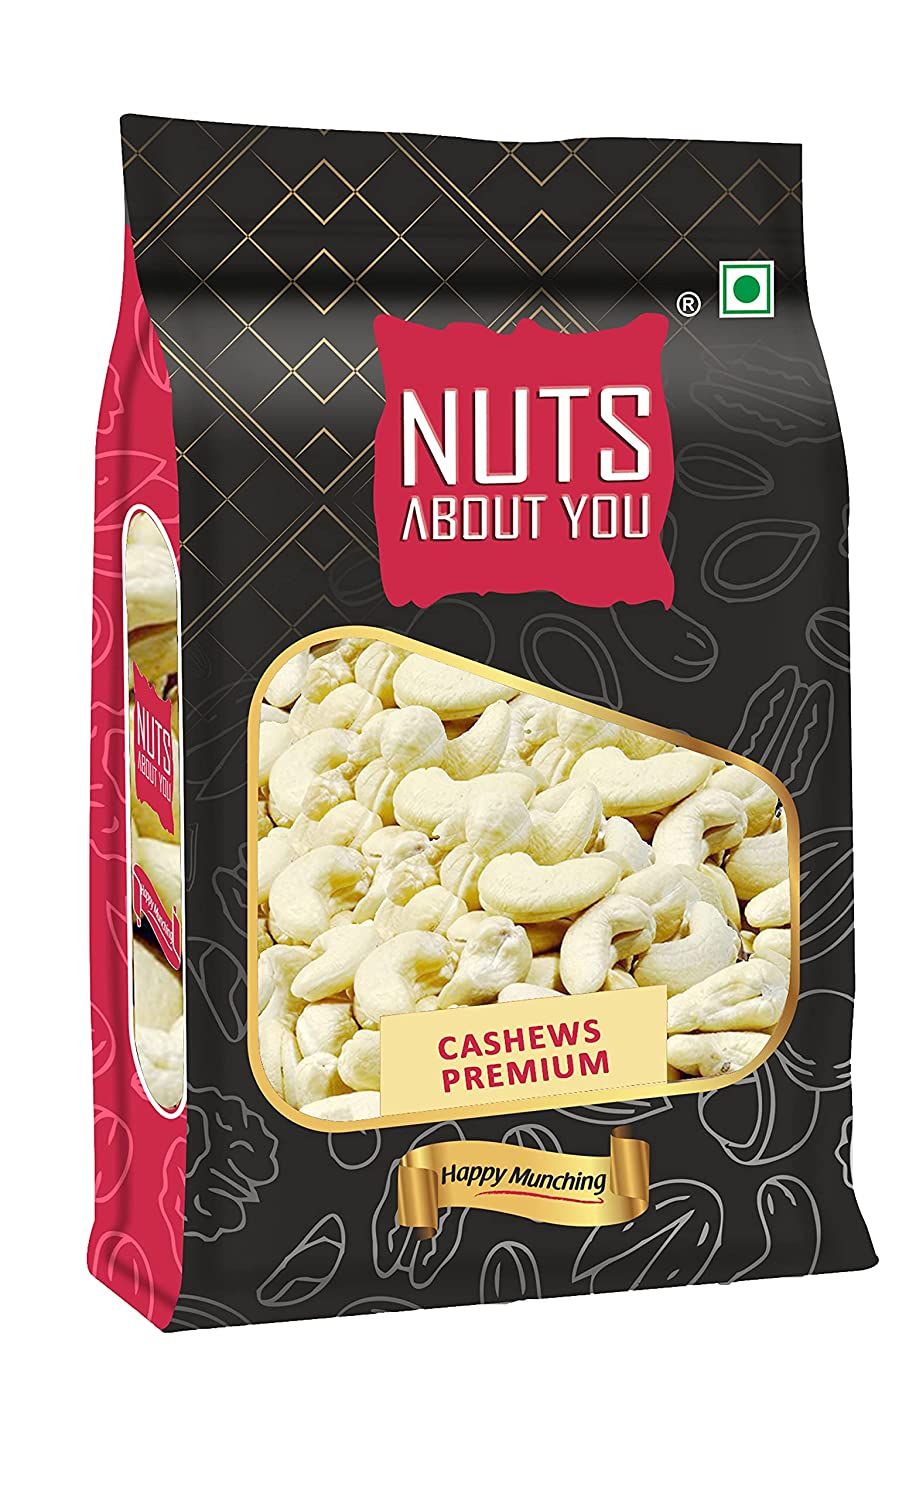 Nuts About You Cashews Image